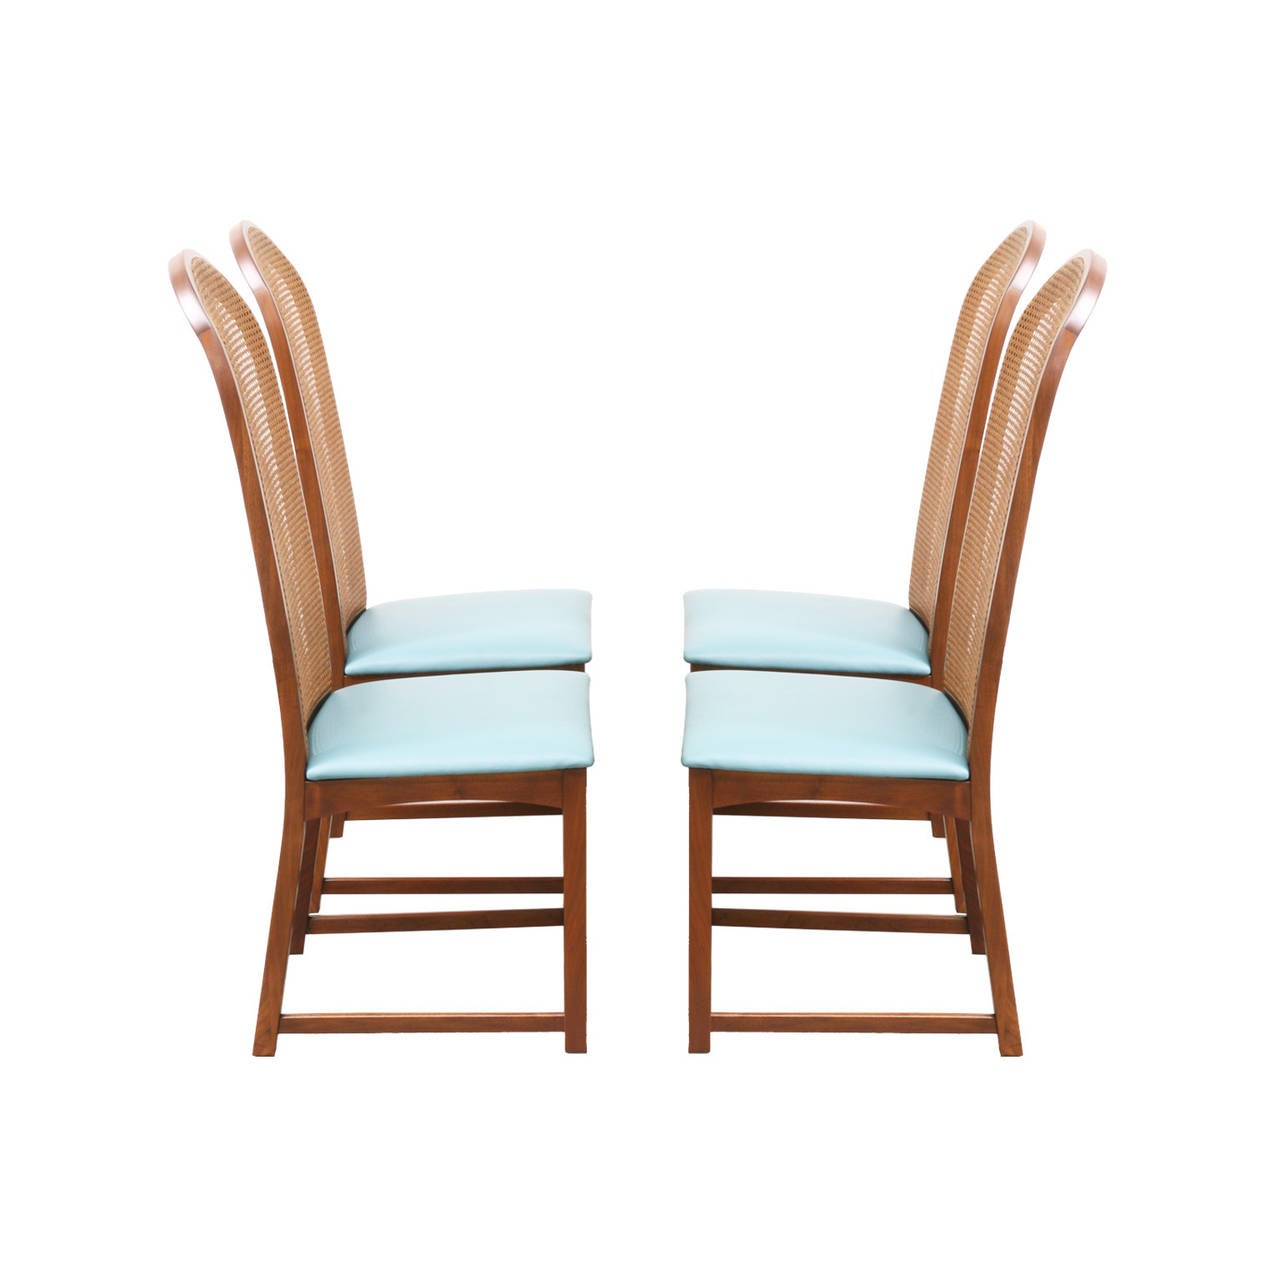 Mid-Century Modern Milo Baughman Dining Chairs with Cane Backrest for Thayer Coggin